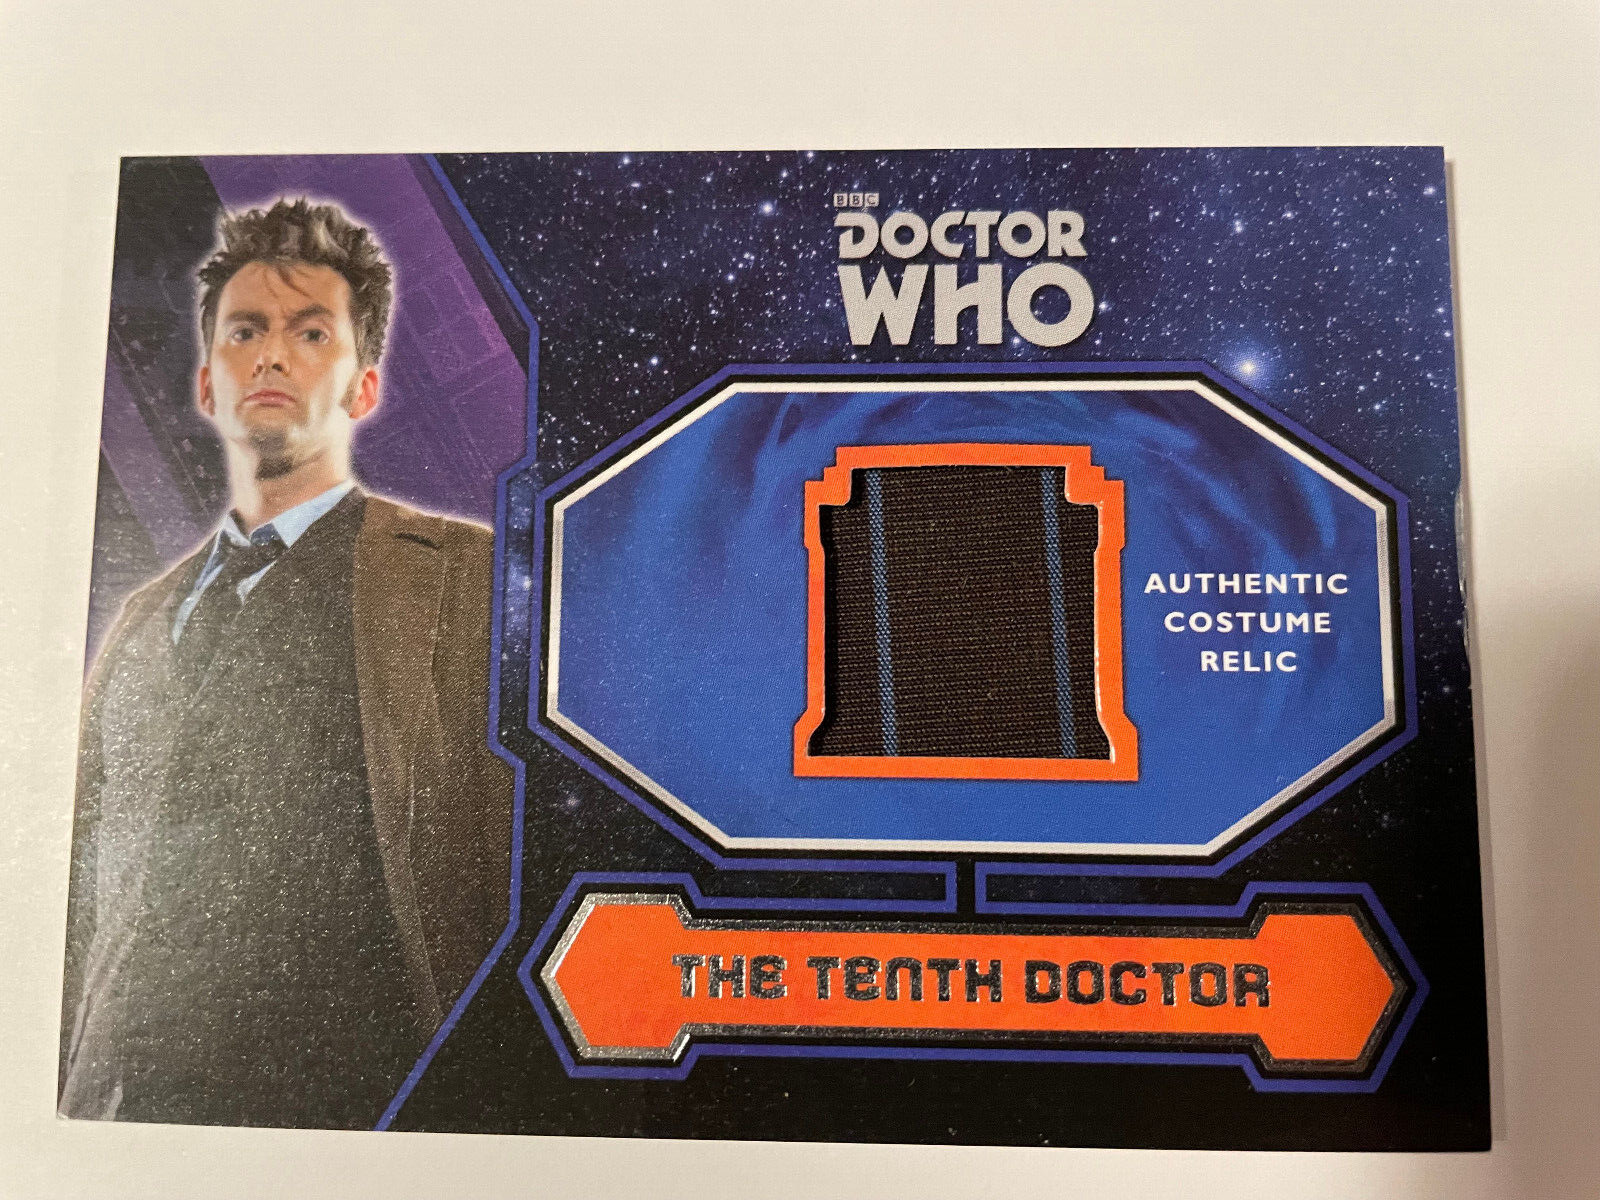 Topps Doctor Who 2015 - Tenth Doctor Brown Suit Trousers Costume Relic Card